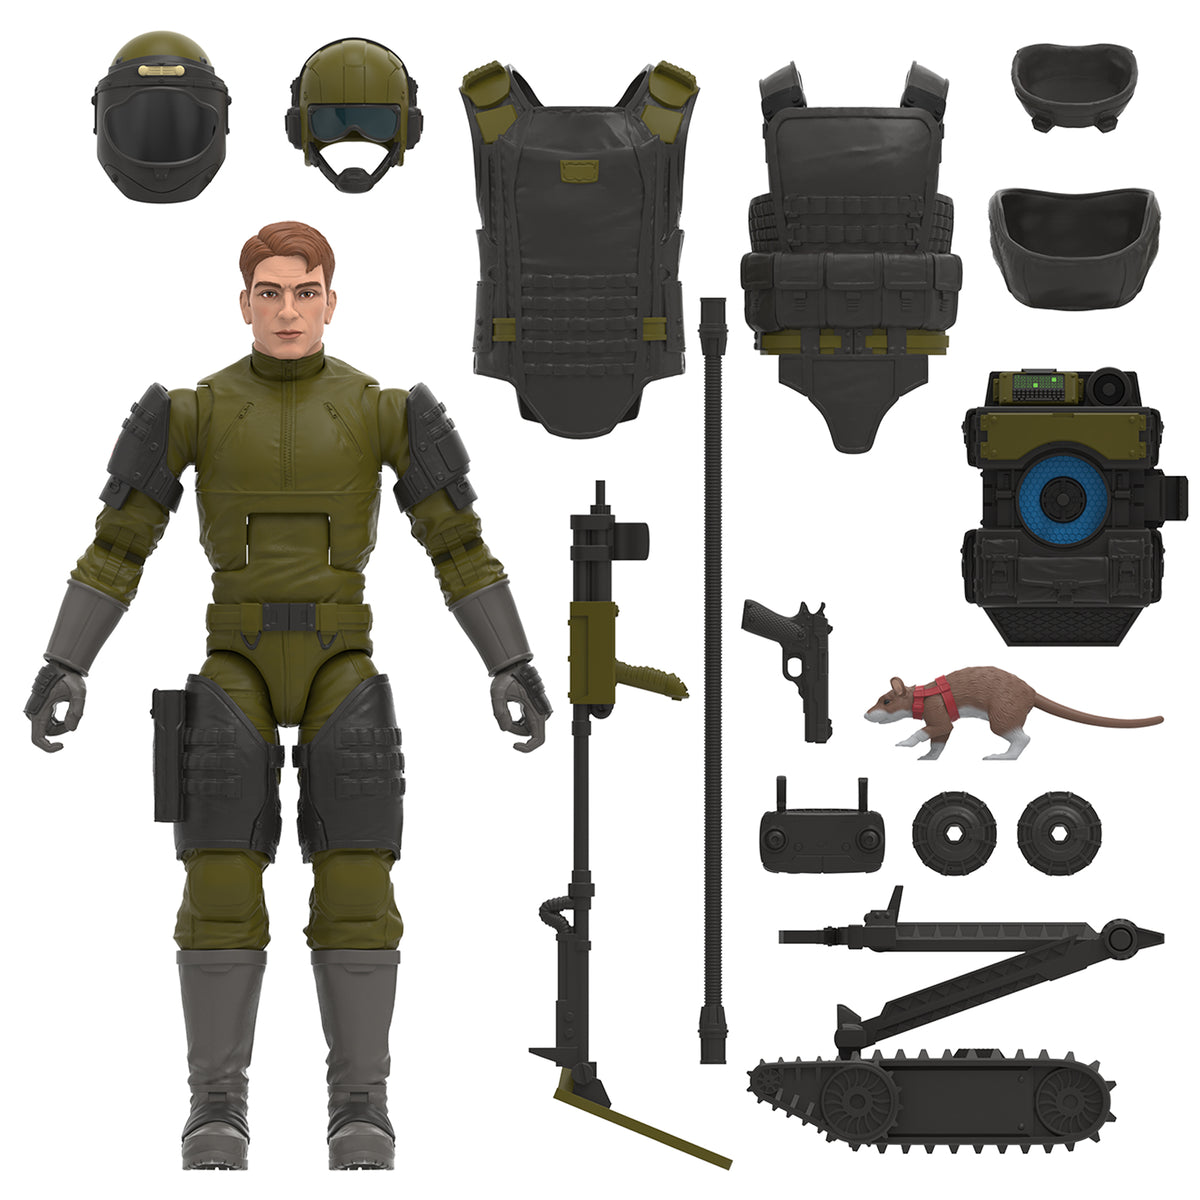 GI Joe Classified Series Robert Grunt Graves,Collectible Action  Figure,87,6-Inch Action Figures for Boys & Girls,with 8 Accessories